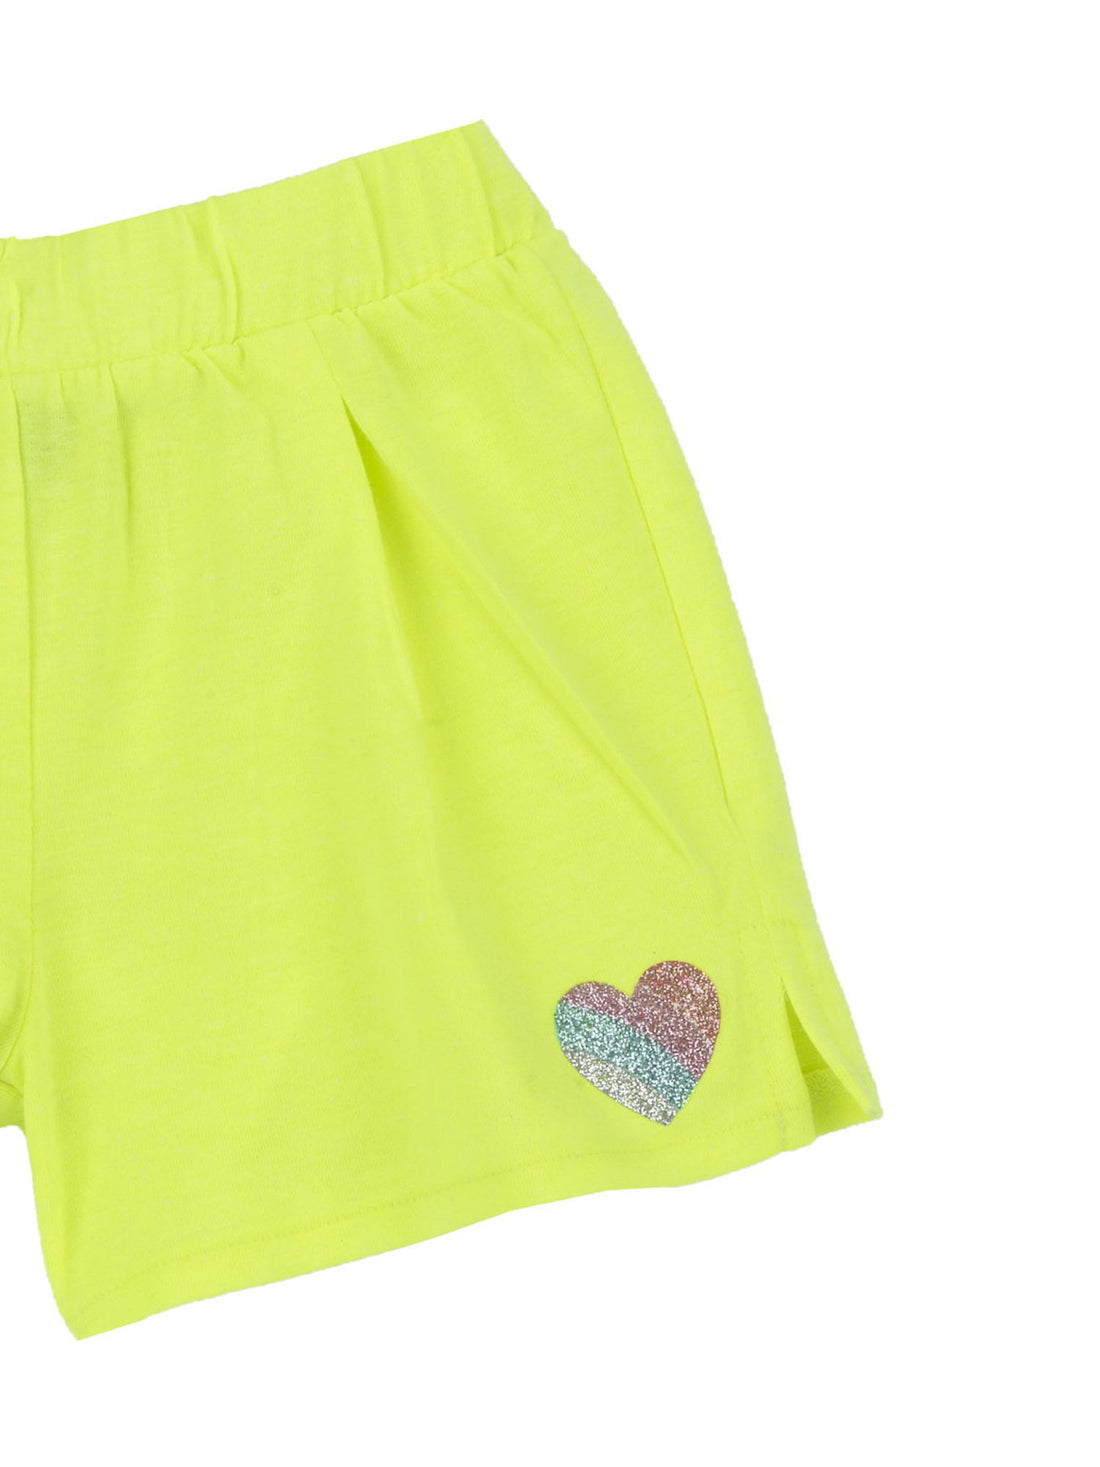 Shorts Verde Chicco